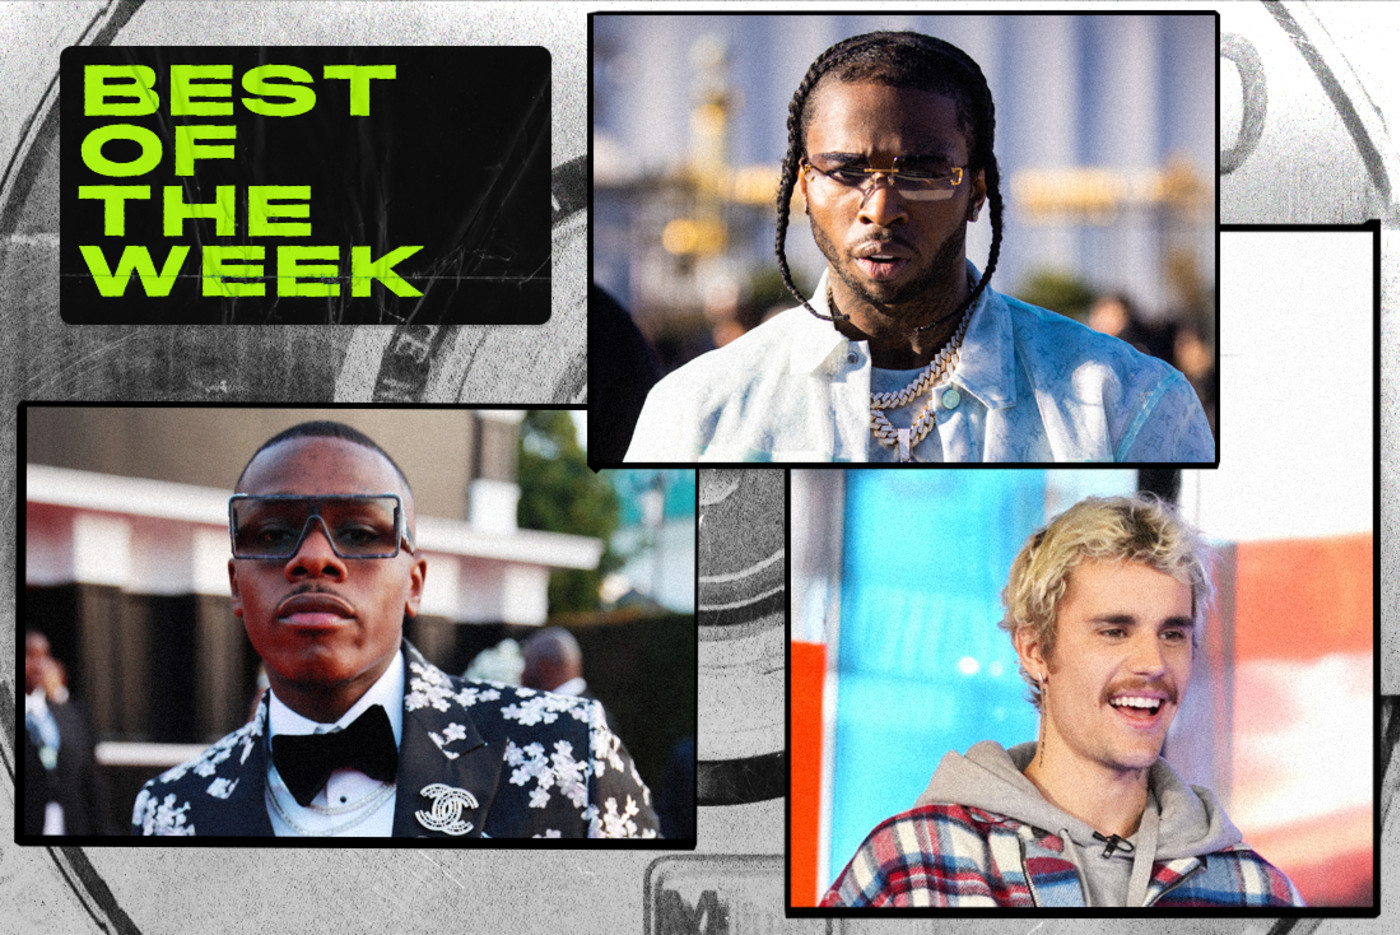 lov civilisation salat Best New Music This Week: DaBaby, Pop Smoke, Justin Bieber, and More |  Complex